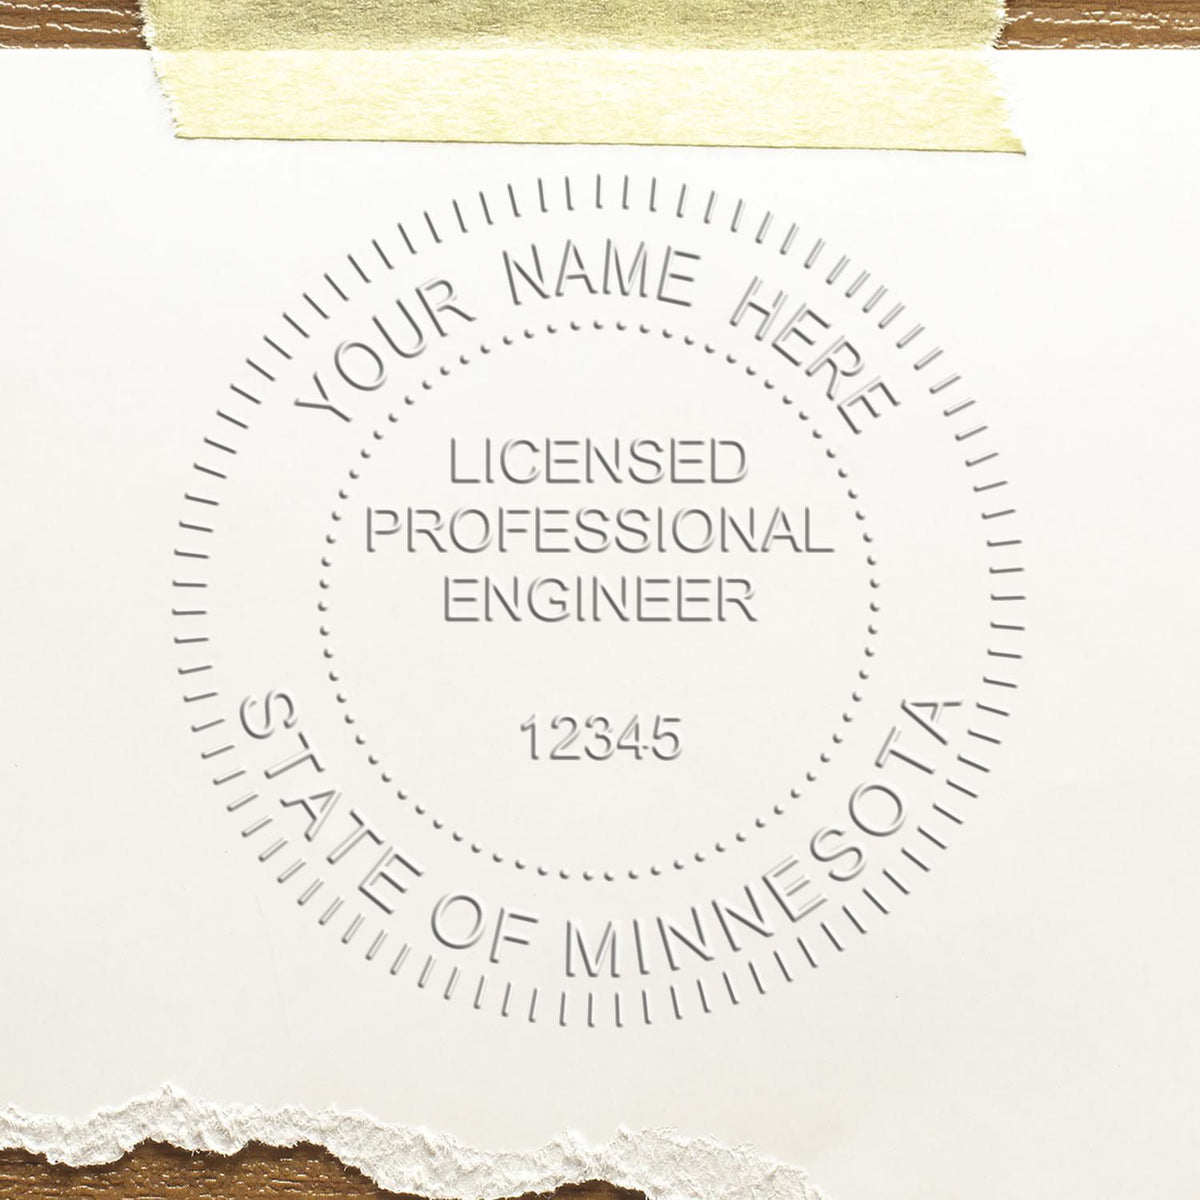 A photograph of the Minnesota Engineer Desk Seal stamp impression reveals a vivid, professional image of the on paper.